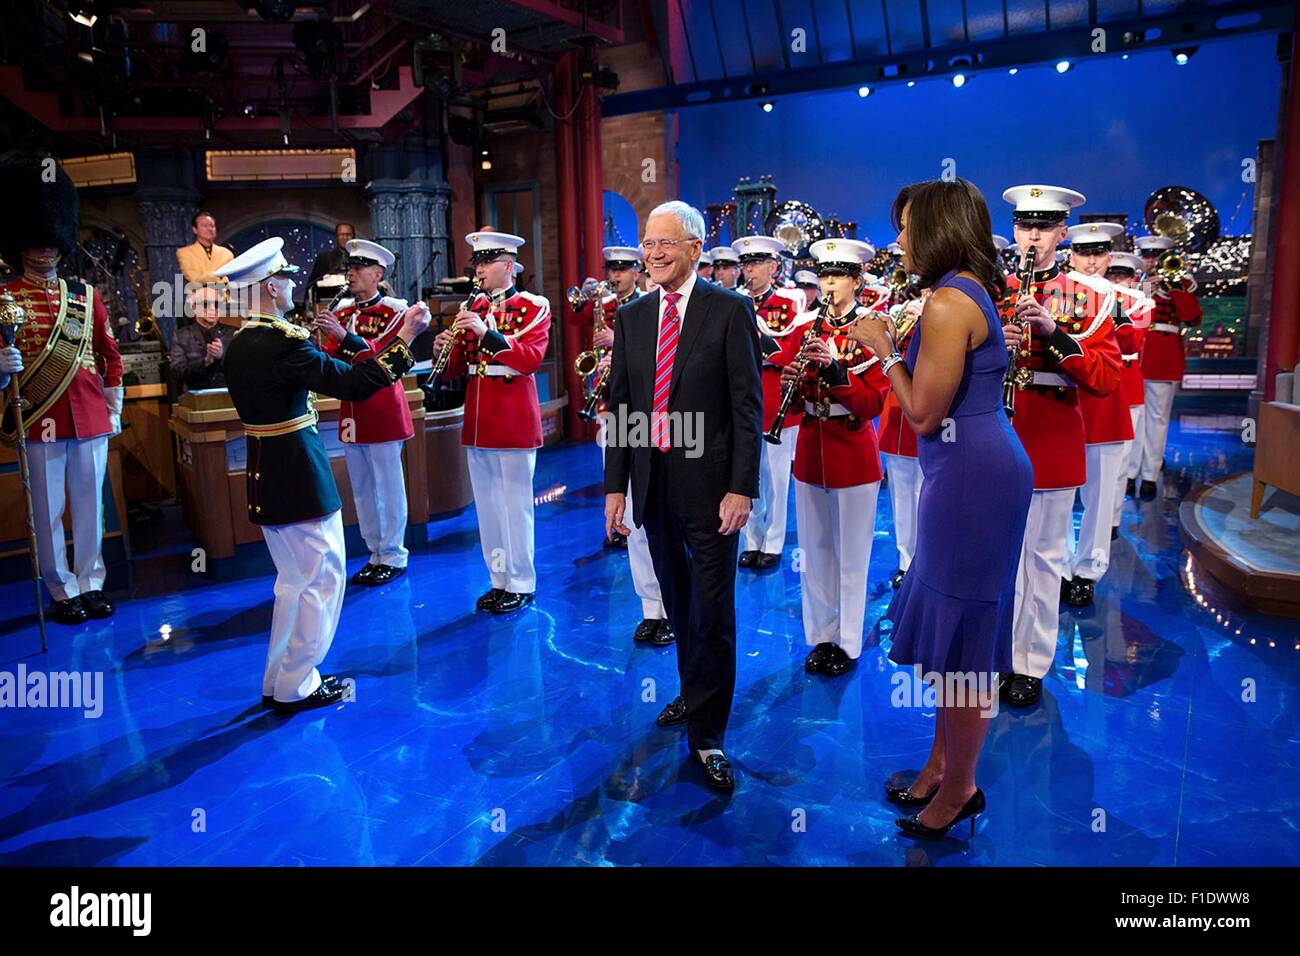 U.S. First Lady Michelle Obama surprises host David Letterman with a performance by the United States Marine Band on The Late Show with David Letterman April 30, 2015 in New York, N.Y. Stock Photo